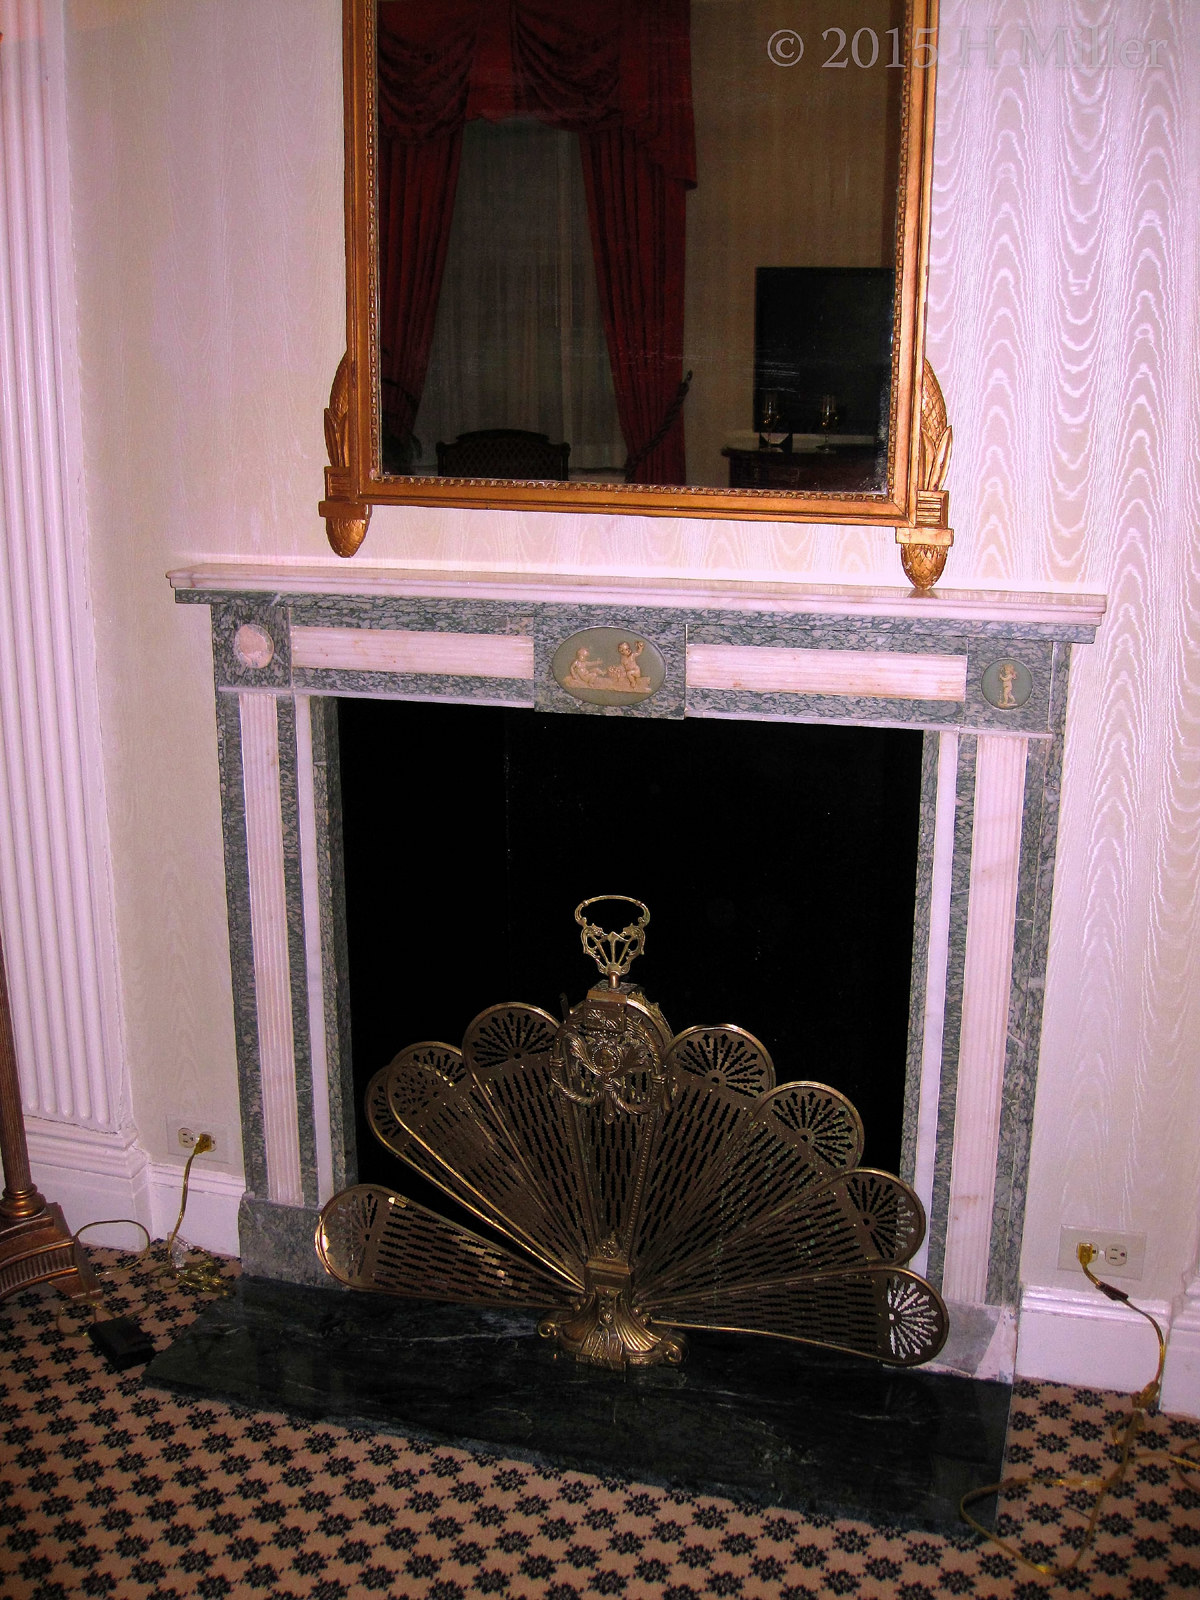 Old Fireplace In The Waldorf Astoria Suite.